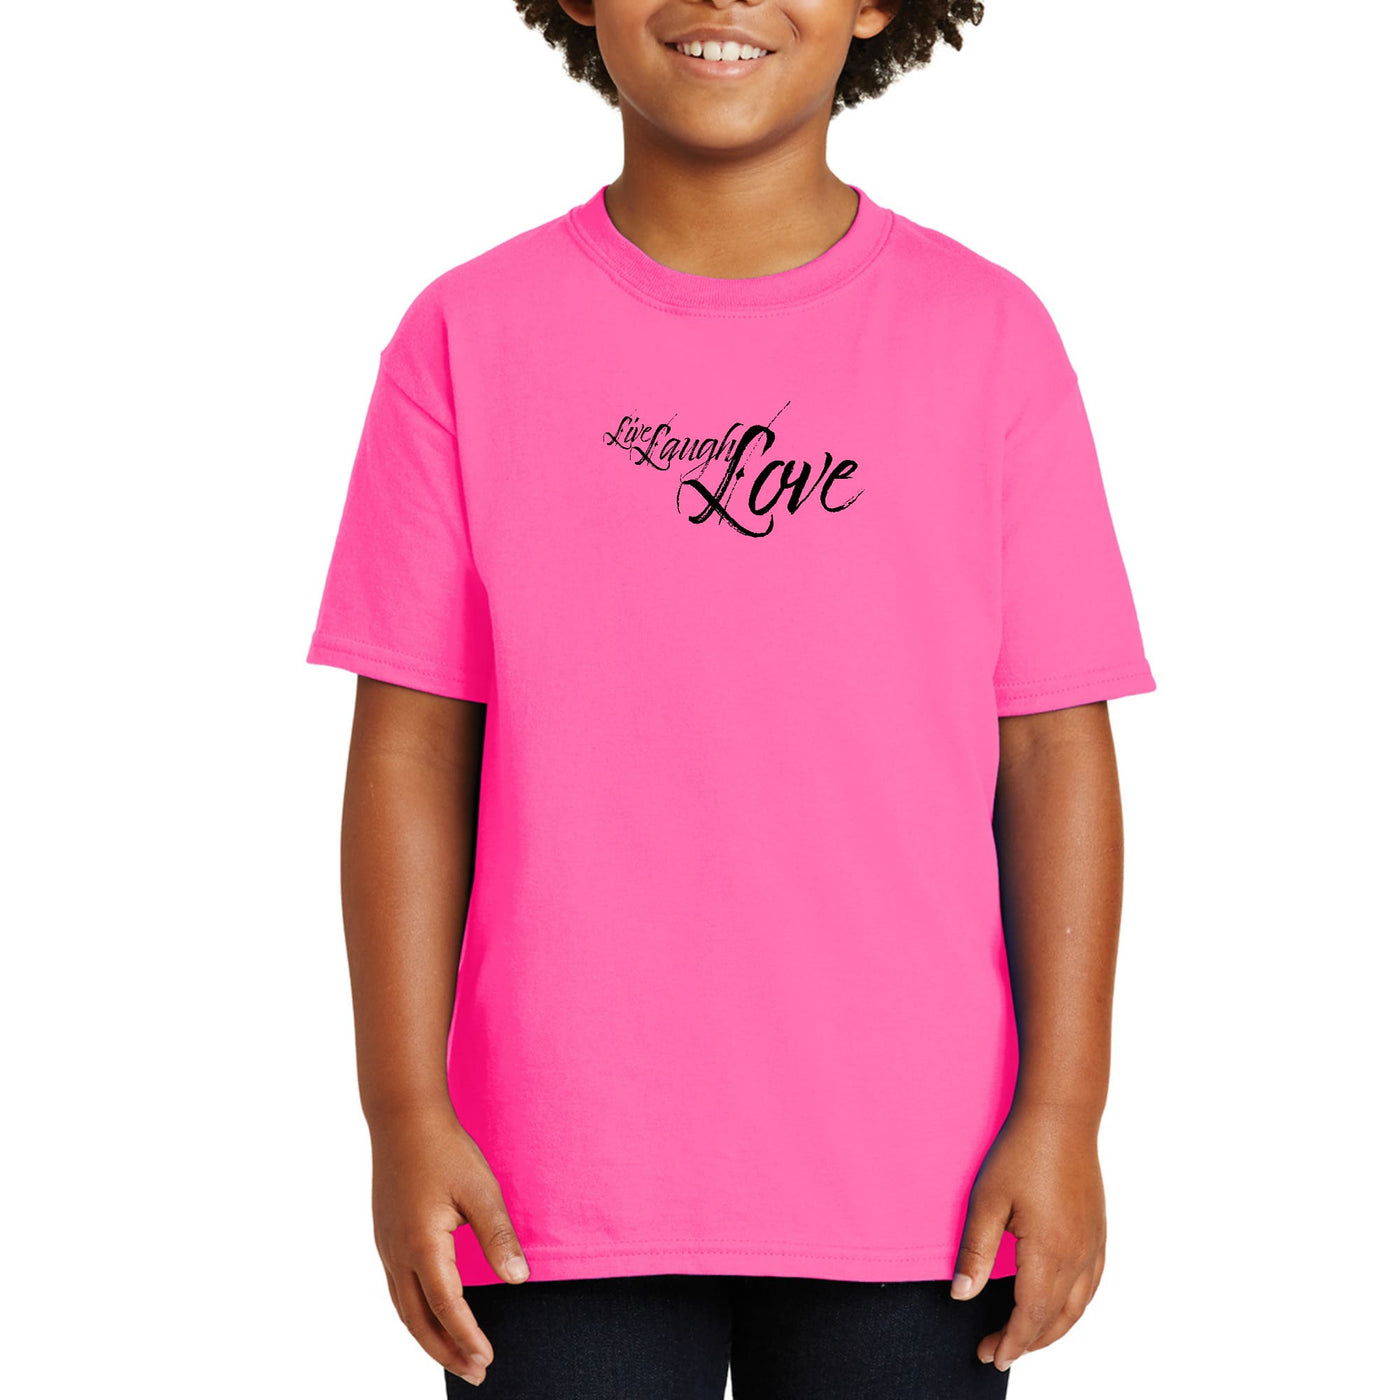 Youth Short Sleeve Graphic T-shirt Live Laugh Love Black Illustration - Youth